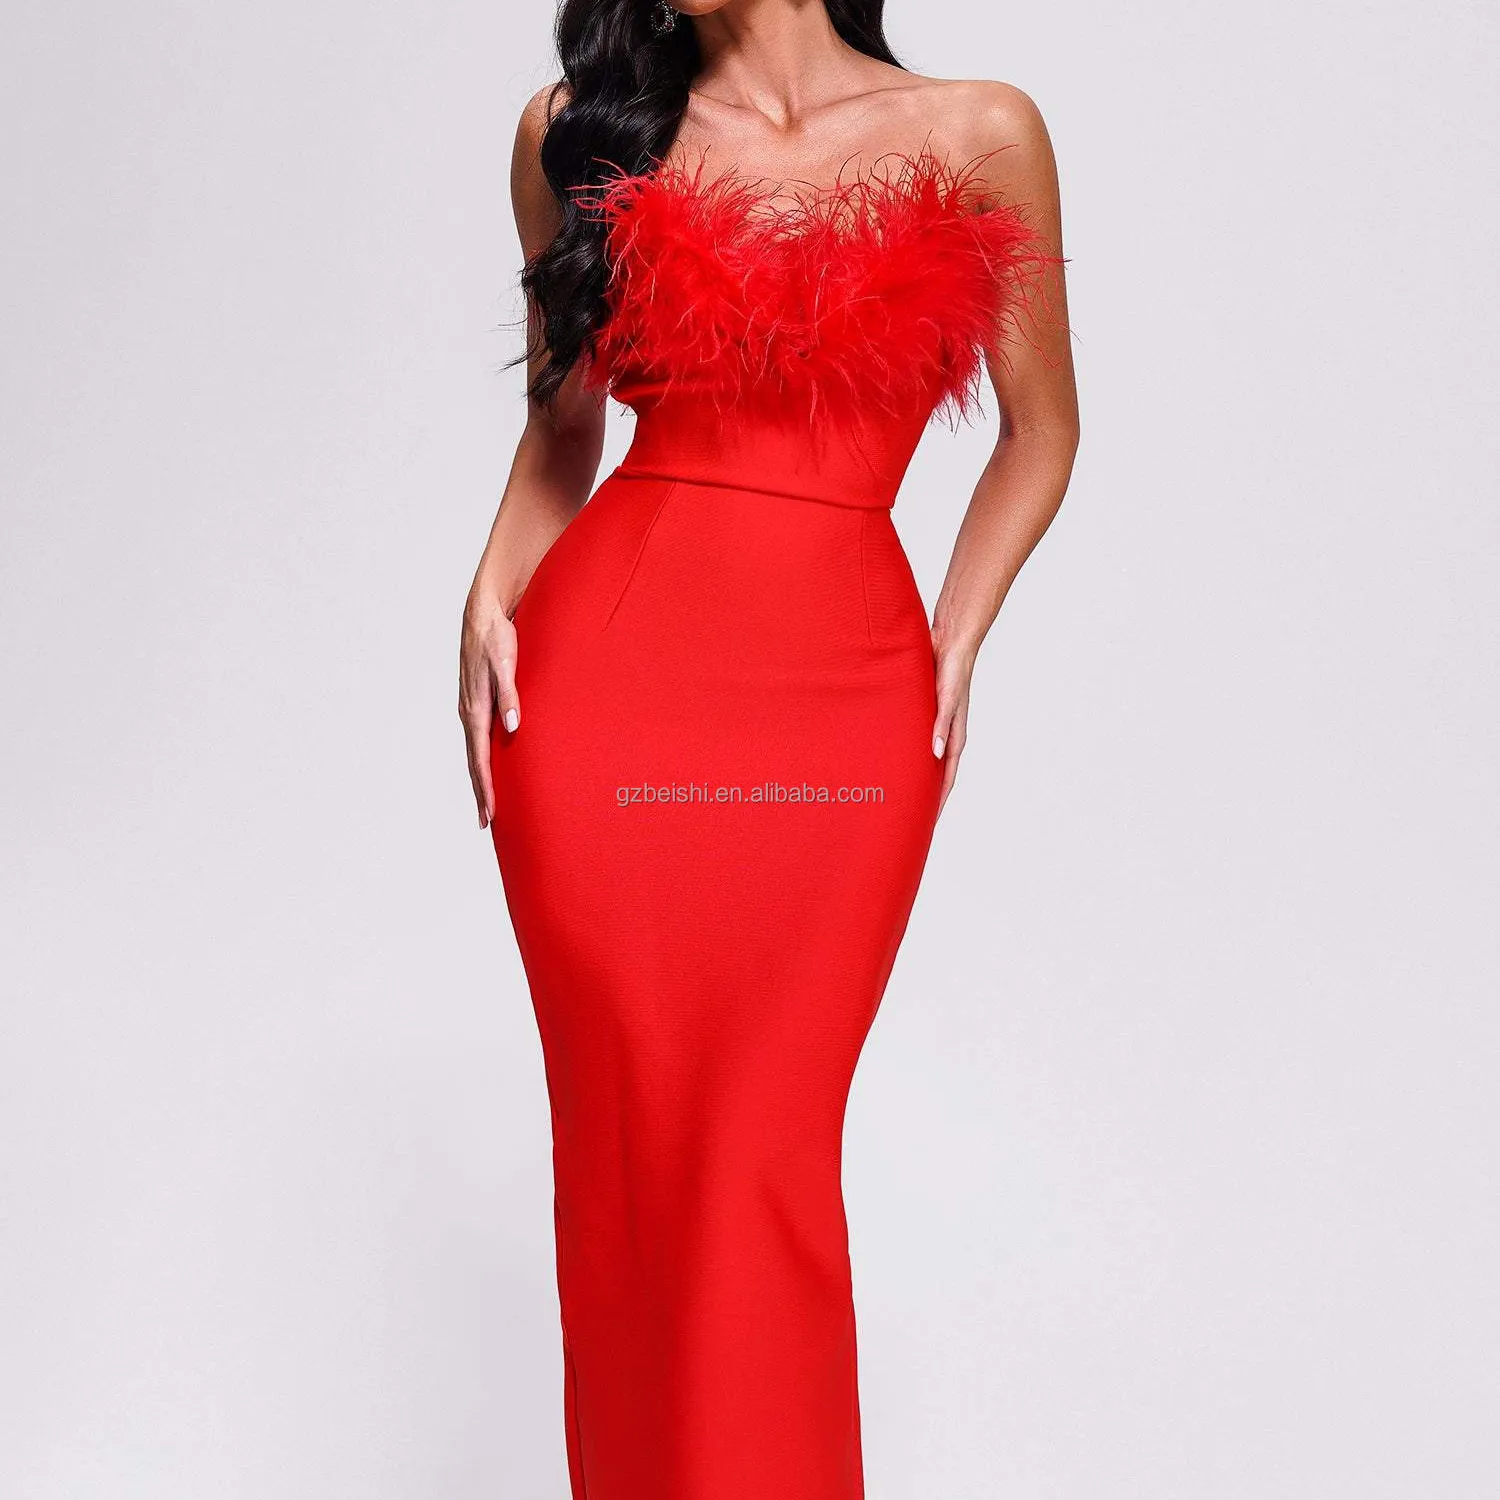 BEISHI Strapless Off Shoulder Feather Red Maxi Bdange Cocktail Bodycon Dresses Women Party Evening Lady Elegant